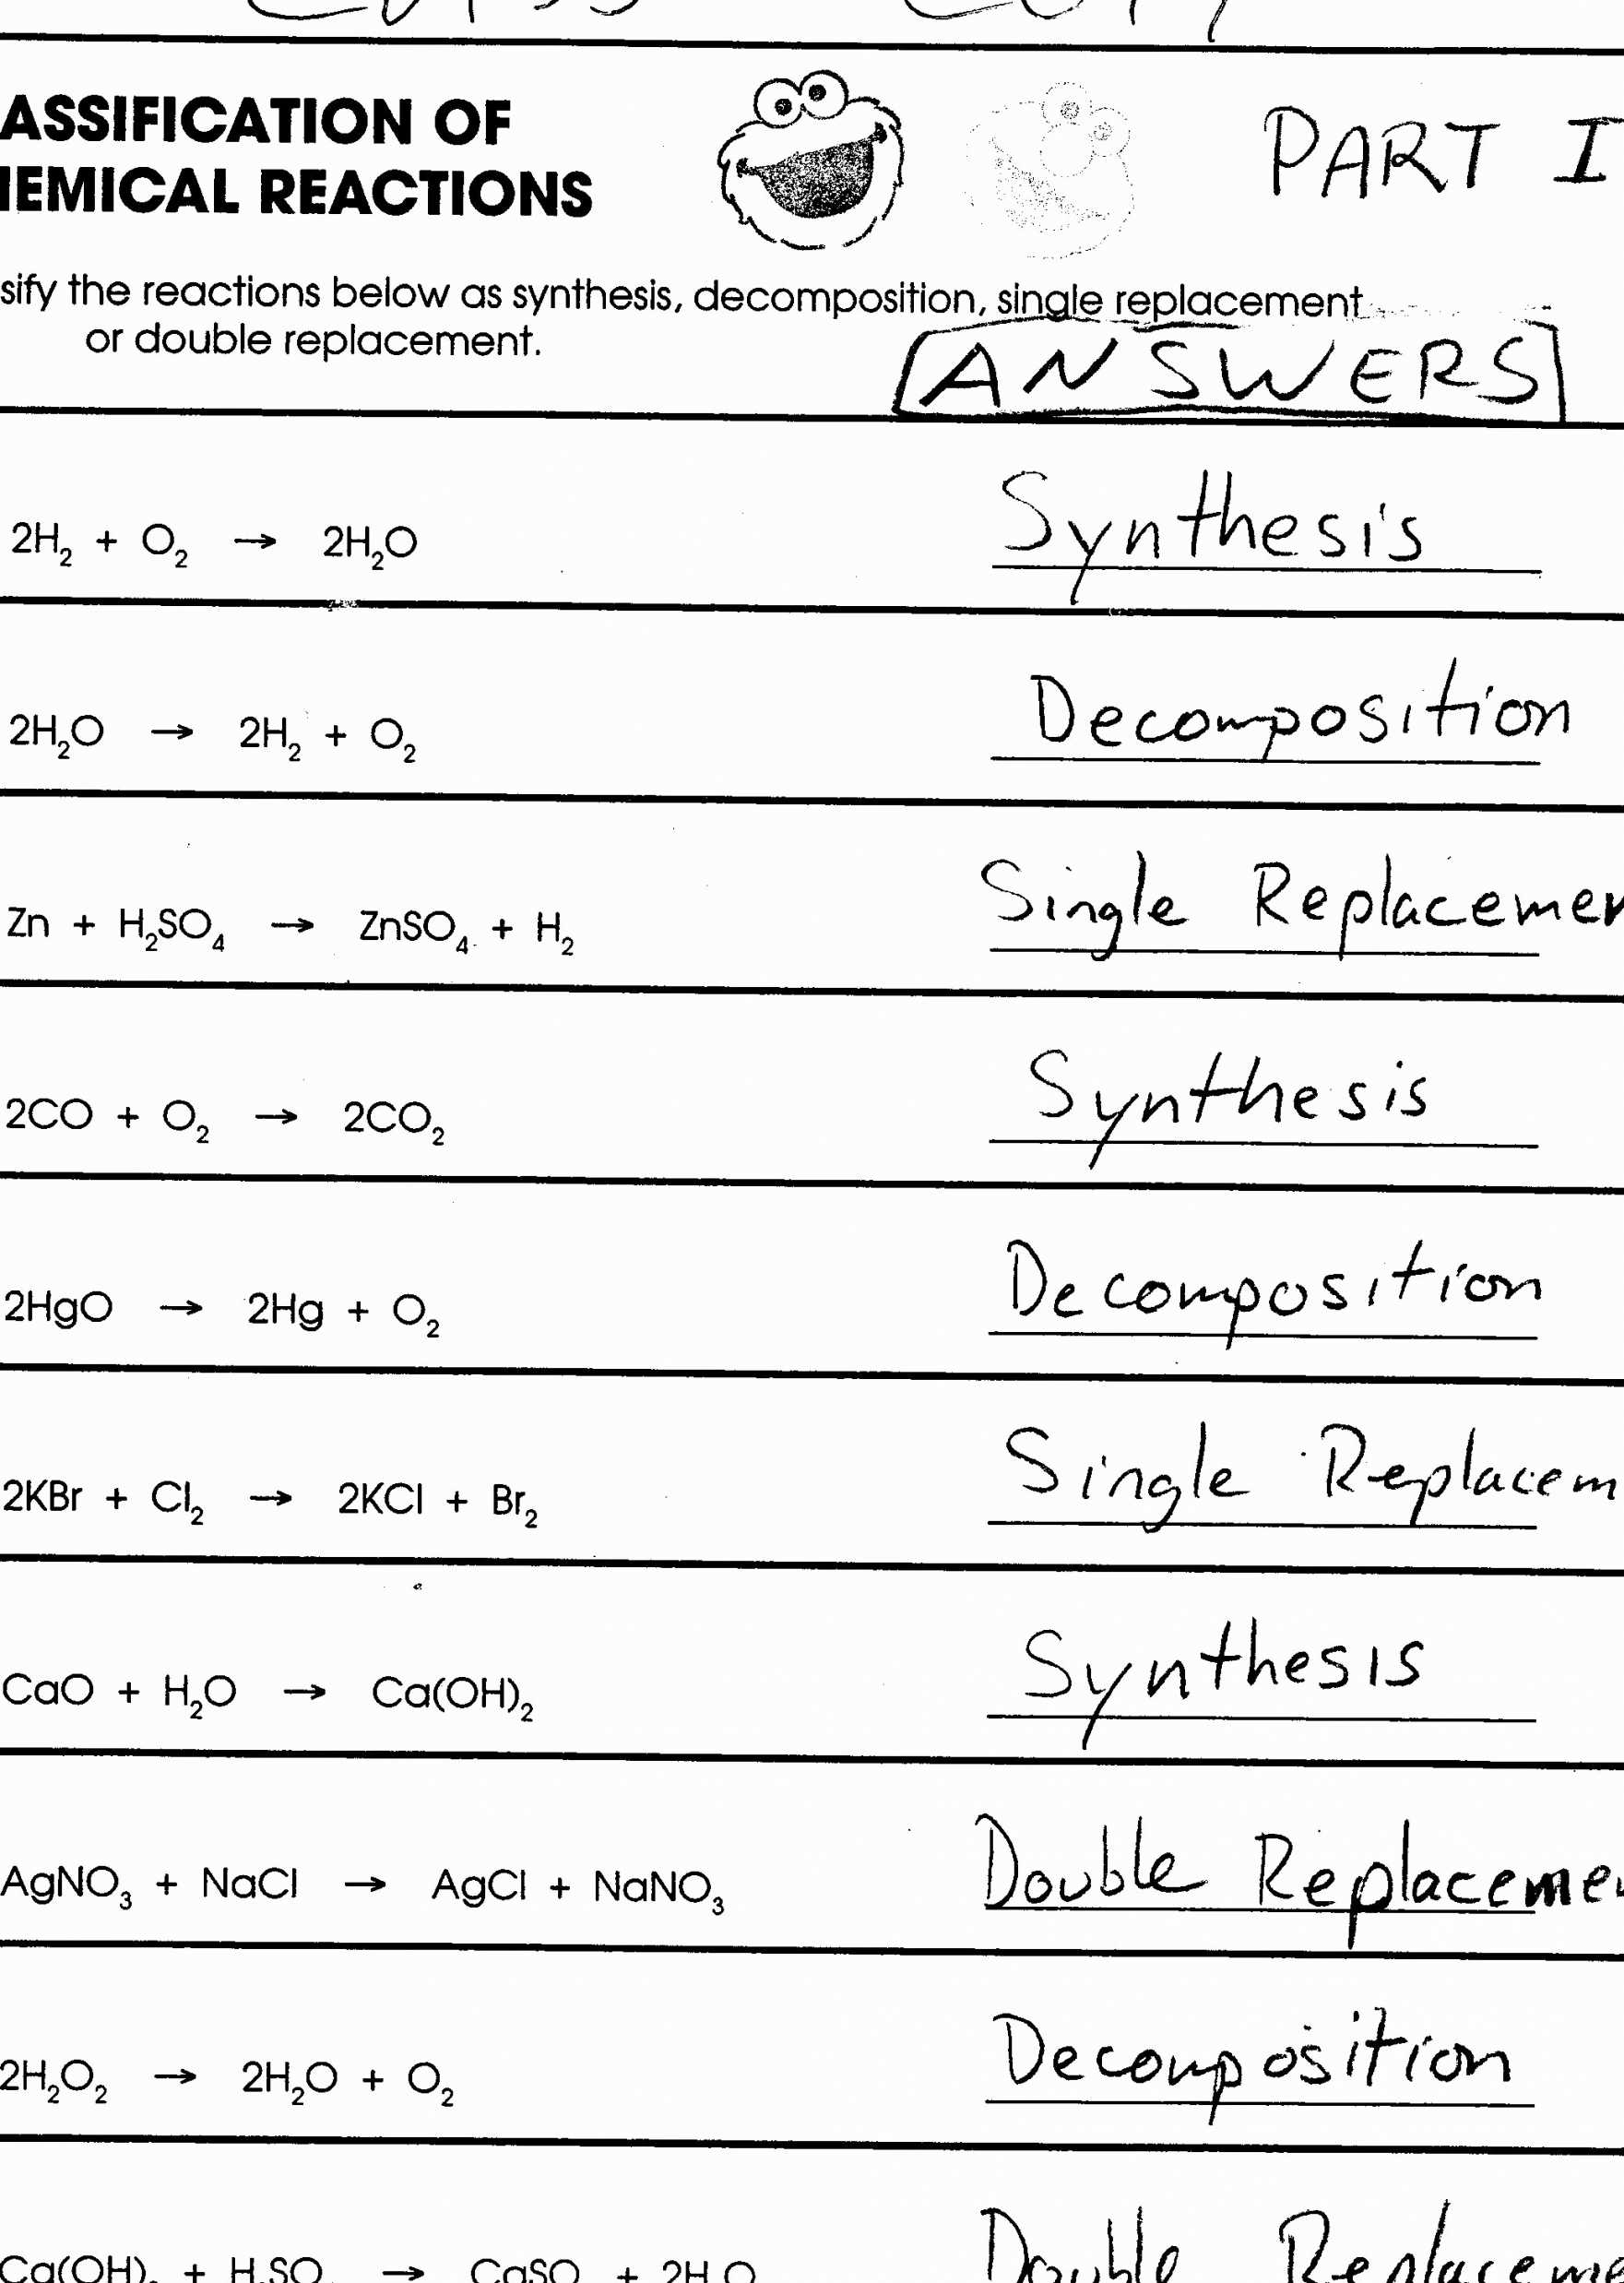 Chemical Reaction Worksheet Answers and Worksheet Types Reactions Worksheet Answers Picture